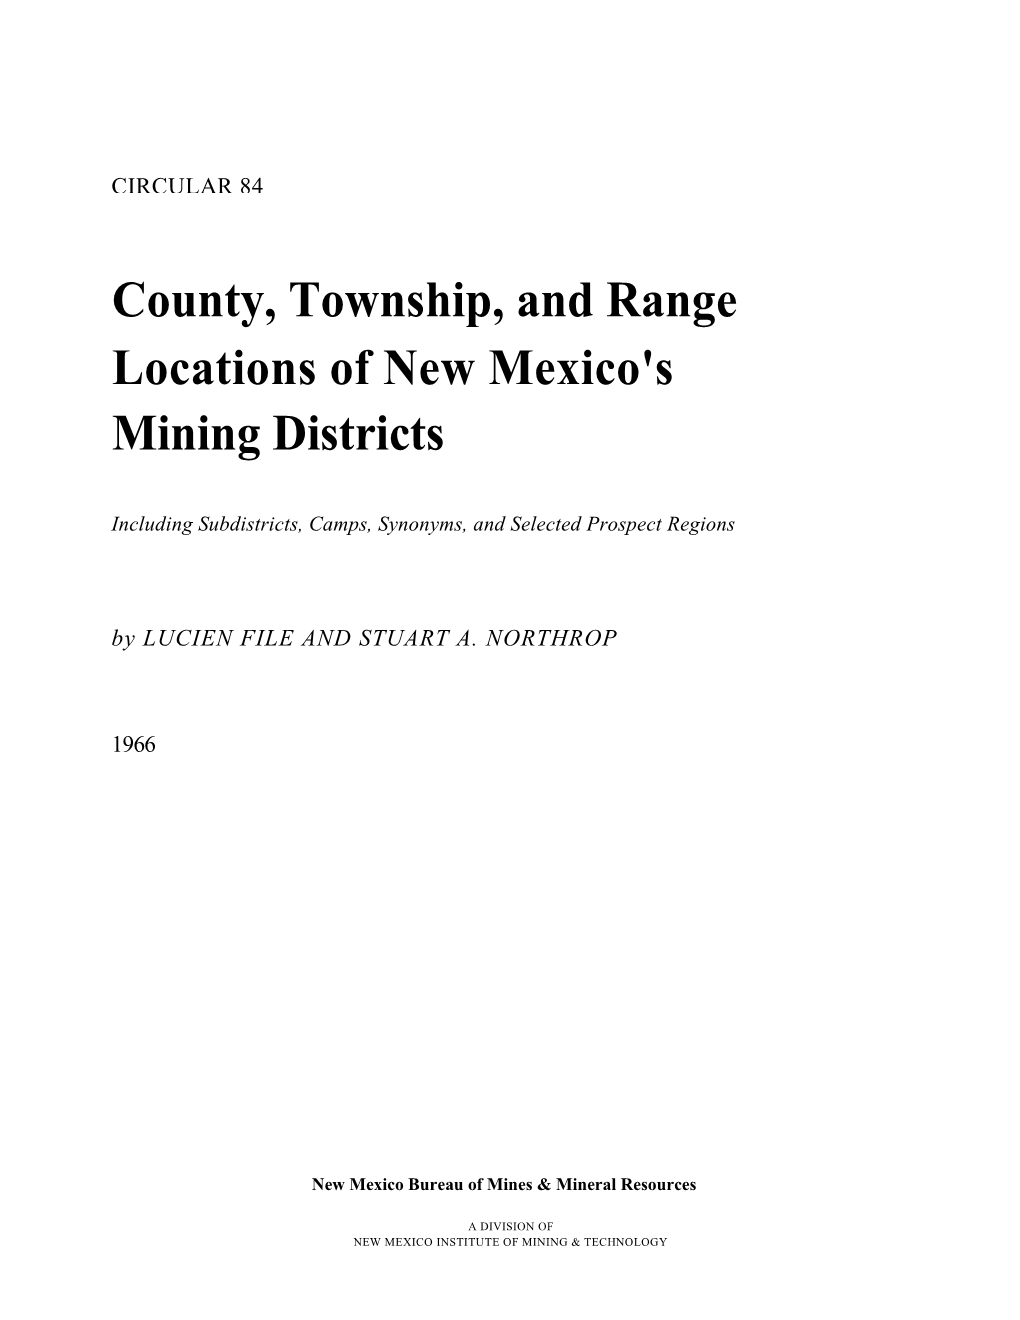 County, Township, and Range Locations of New Mexico's Mining Districts